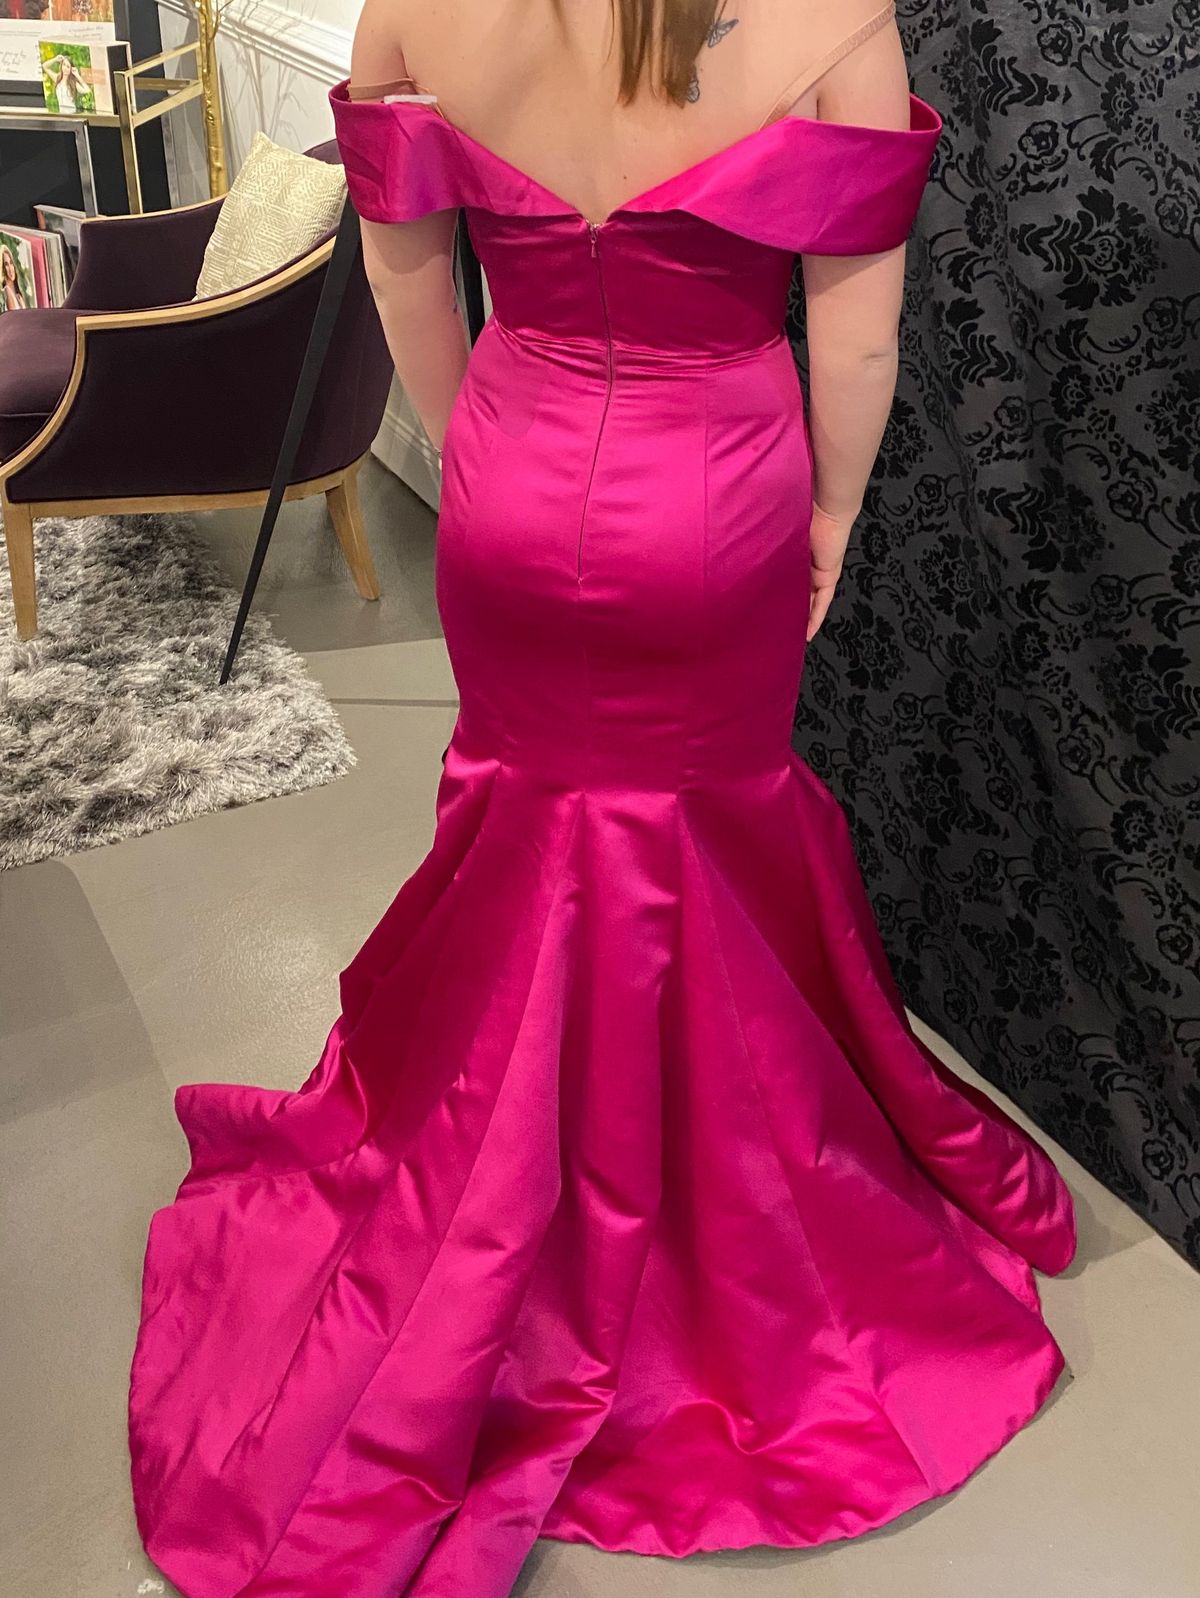 Ashley Lauren Size 6 Prom Off The Shoulder Pink Mermaid Dress on Queenly